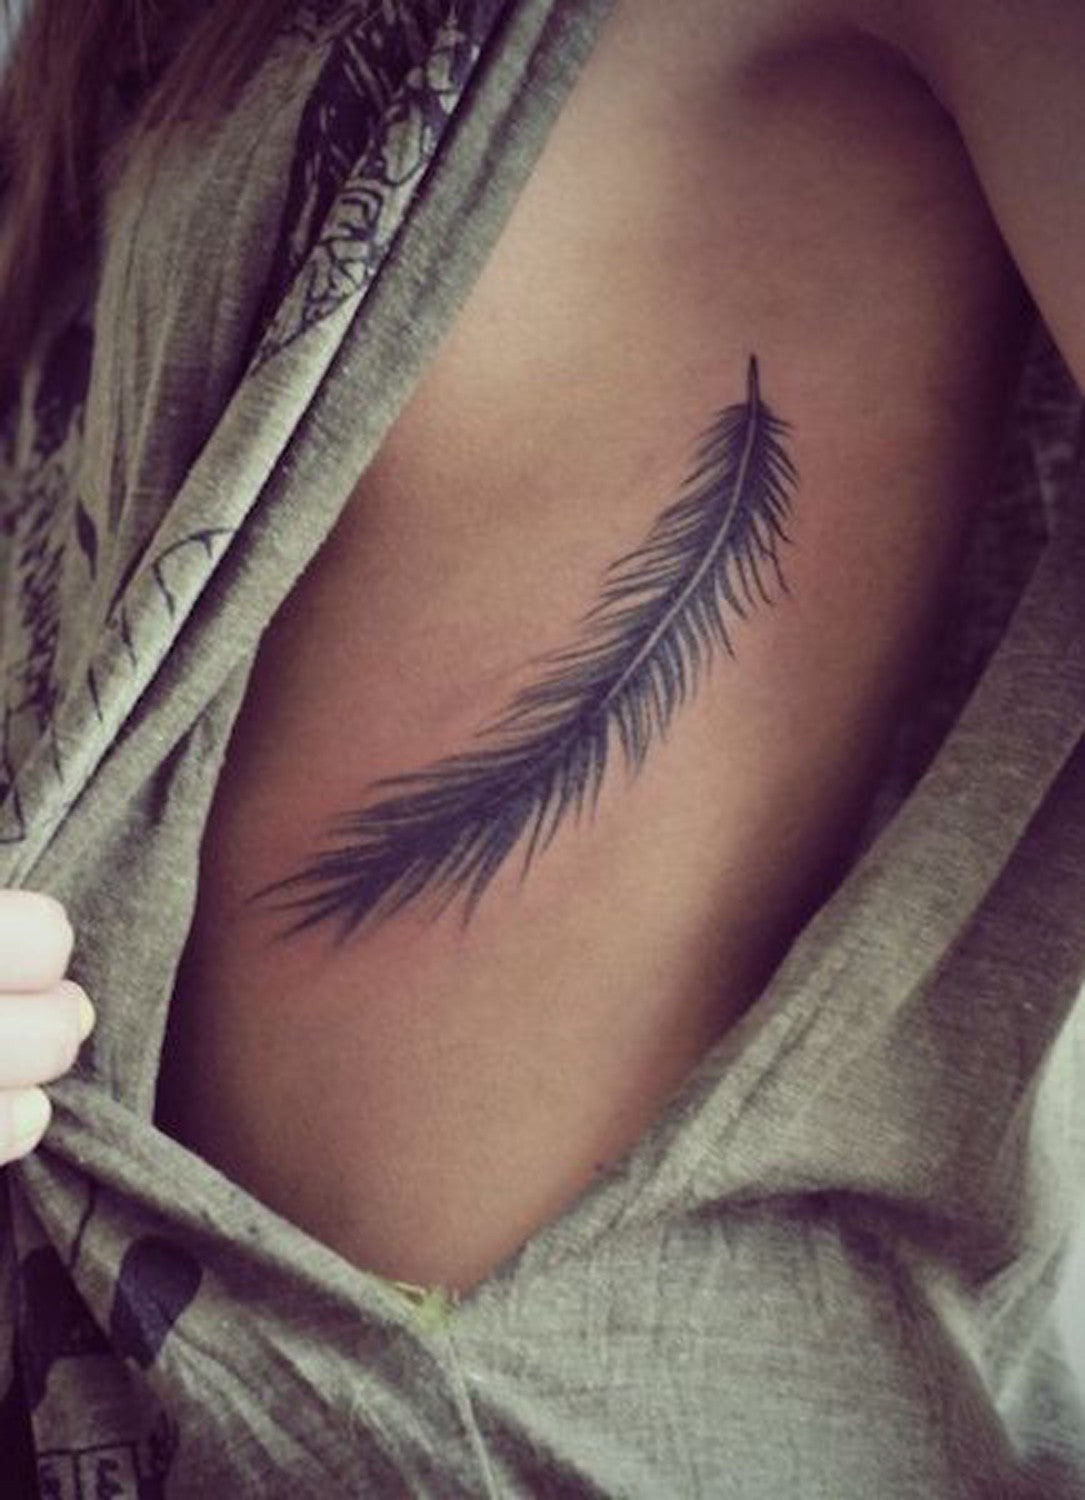 Feather Tattoos for Men  Ideas and Designs for Guys